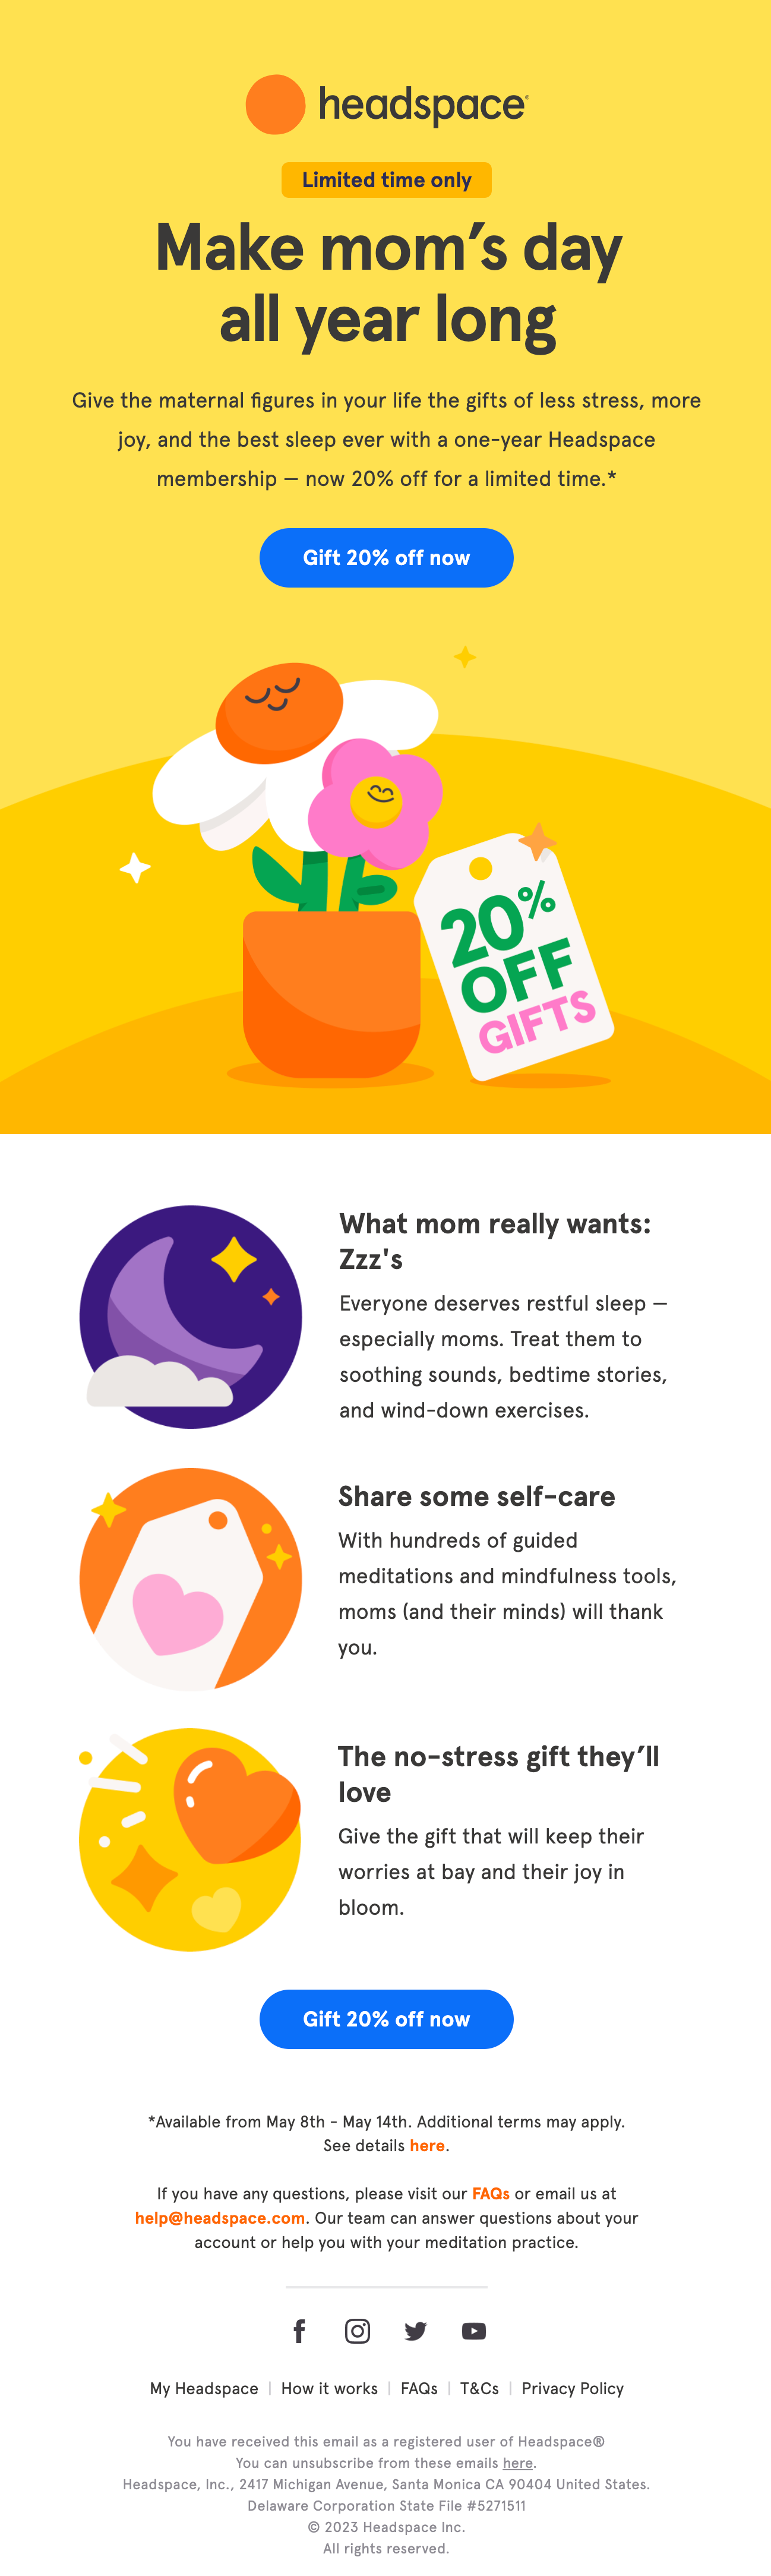 Email by Headspace on Mother's Day